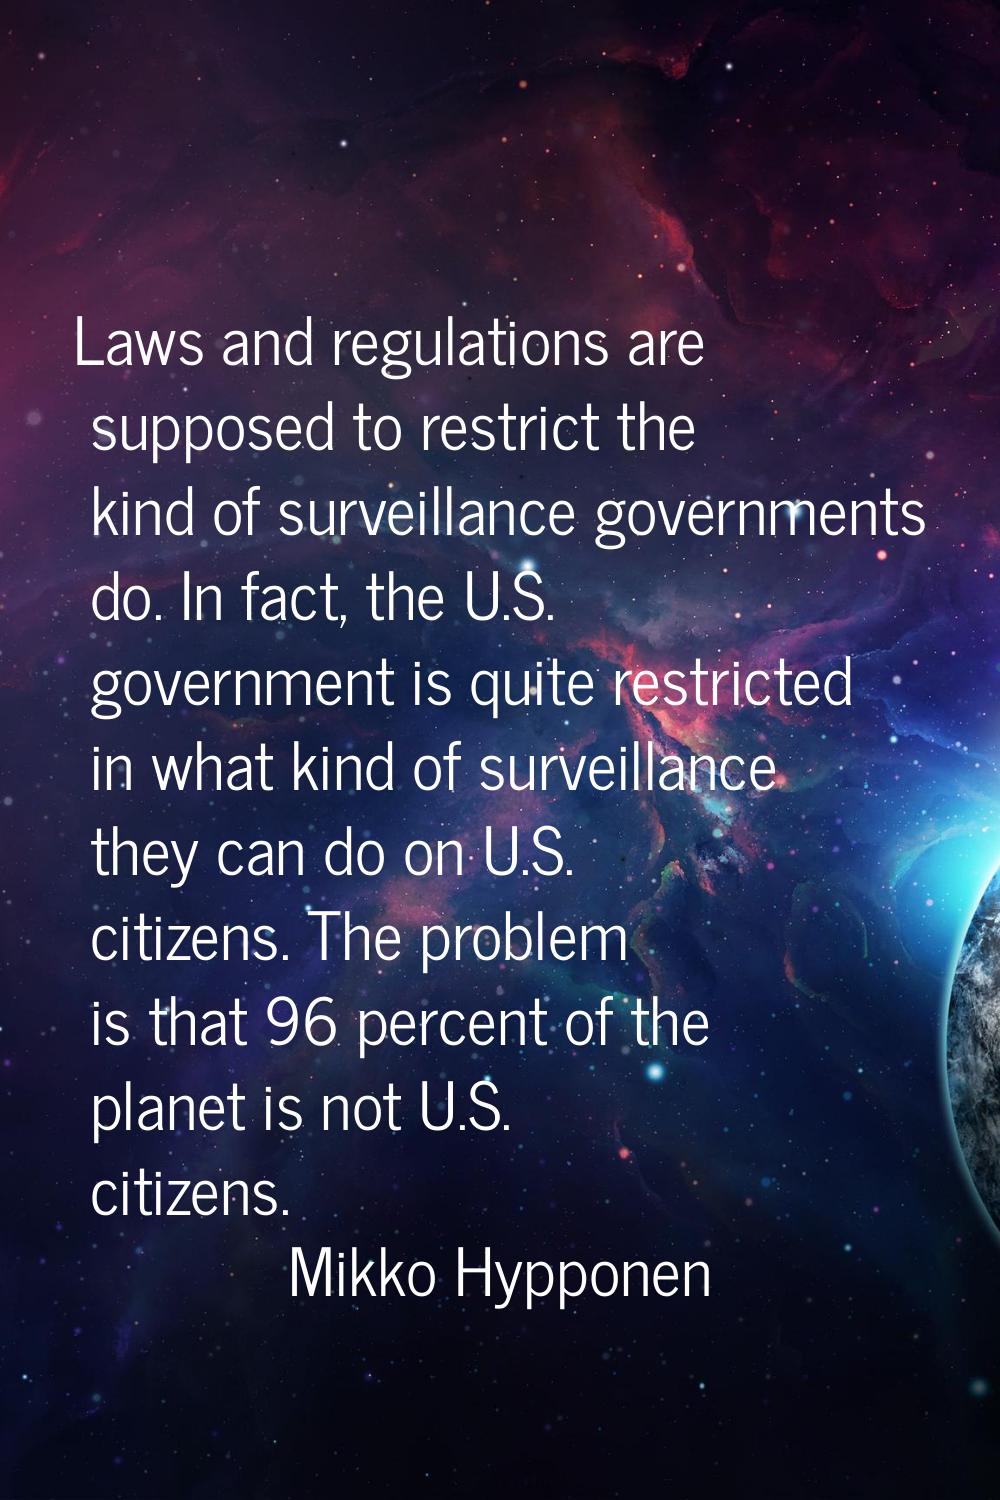 Laws and regulations are supposed to restrict the kind of surveillance governments do. In fact, the